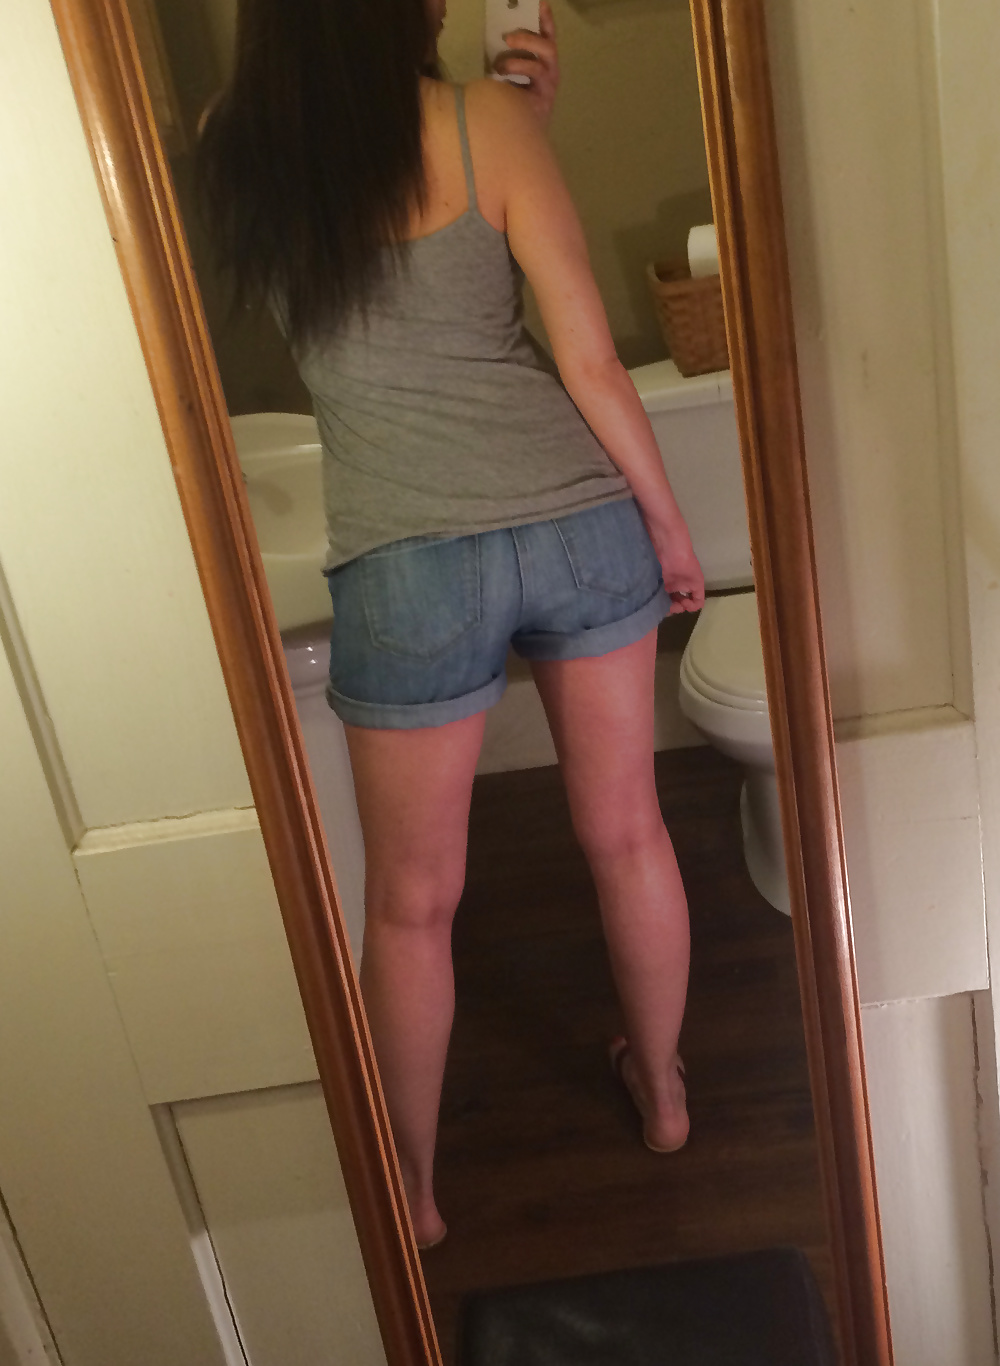 Free Time for shorts photos